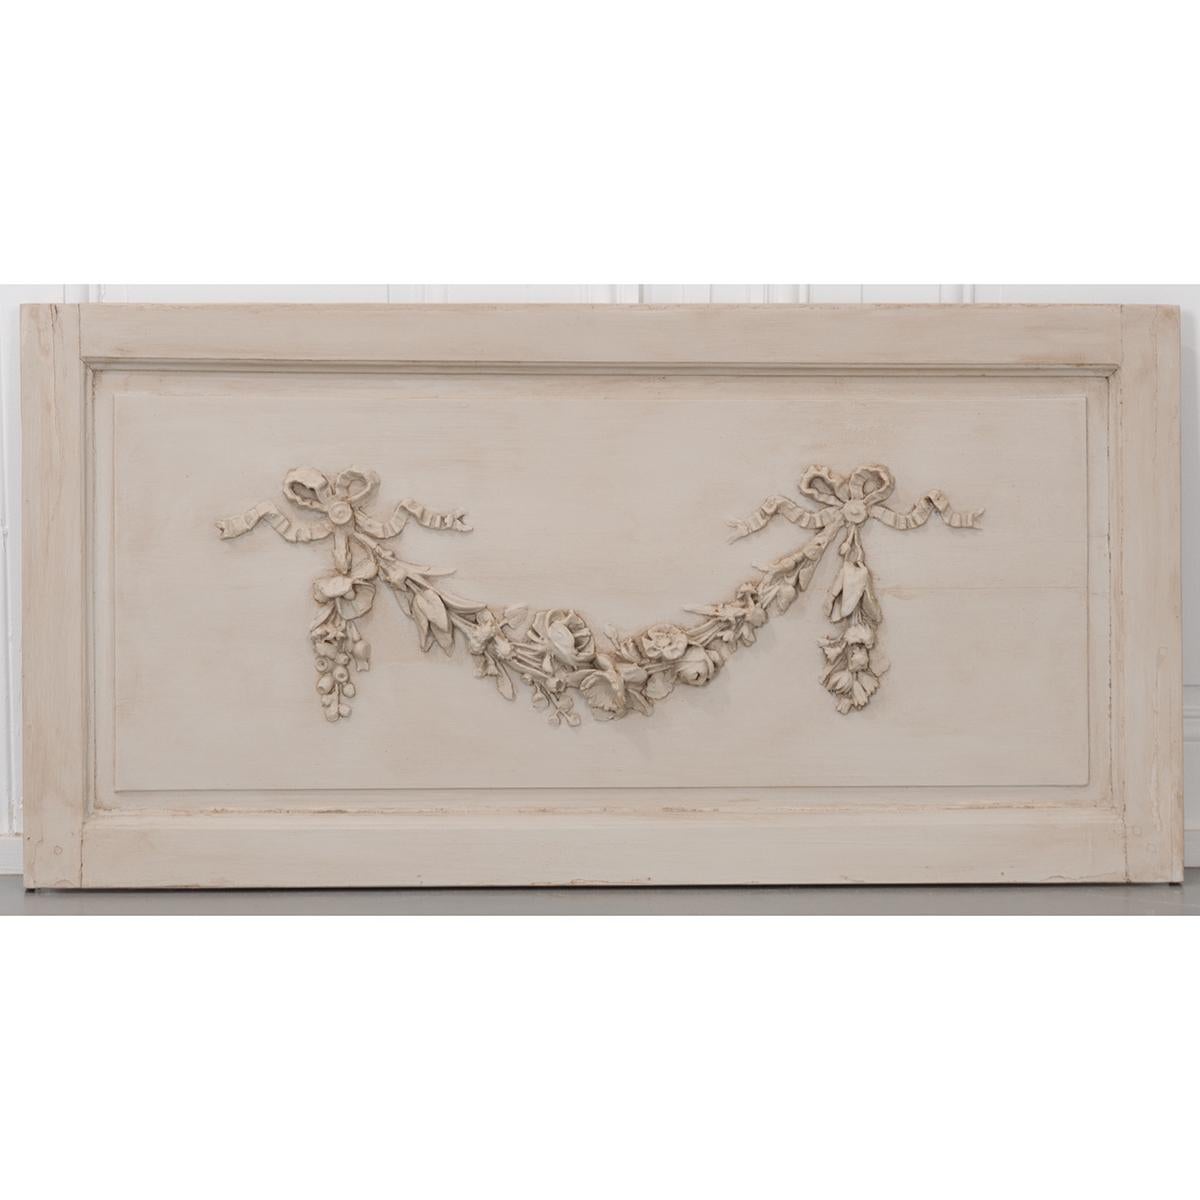 A fantastic carved panel, taken from a French 19th century painted boiserie collection. This wonderful panel depicts a floral garland swag that is laden with beautifully detailed roses, daffodils, lilies and their foliage suspended in air by